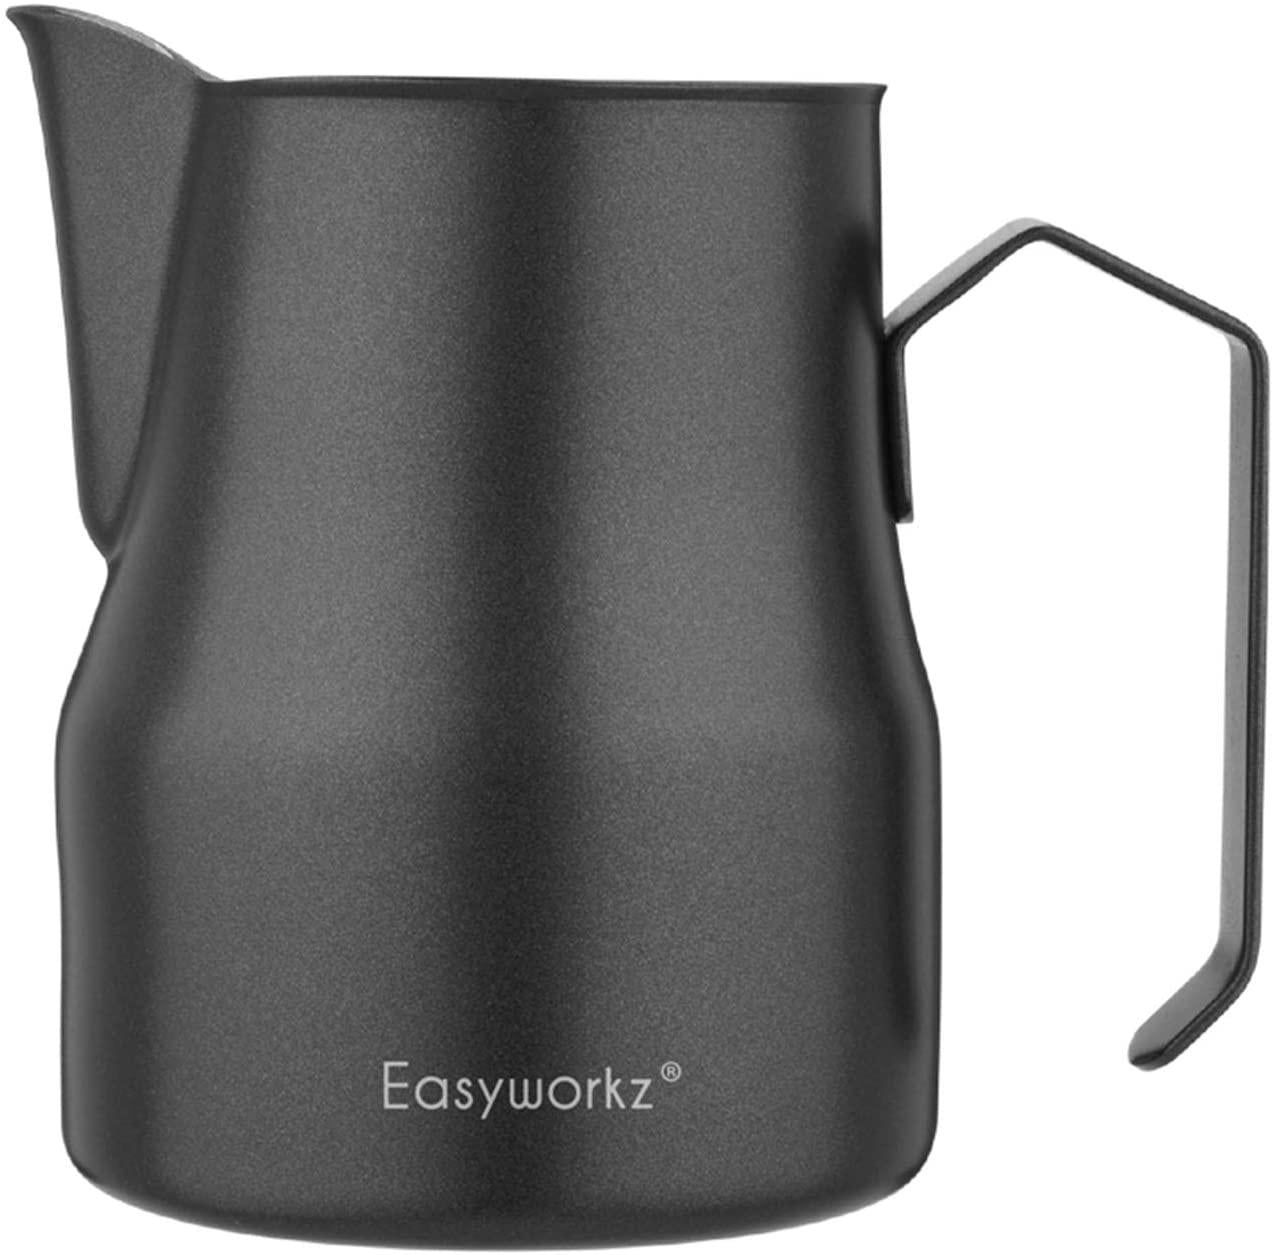 Easyworkz, Easywork Espresso Steaming Pitcher 450ml Stainless Steel Coffee Frothing Picther Milk Jug Cup Cappuccino Latte Art Cup